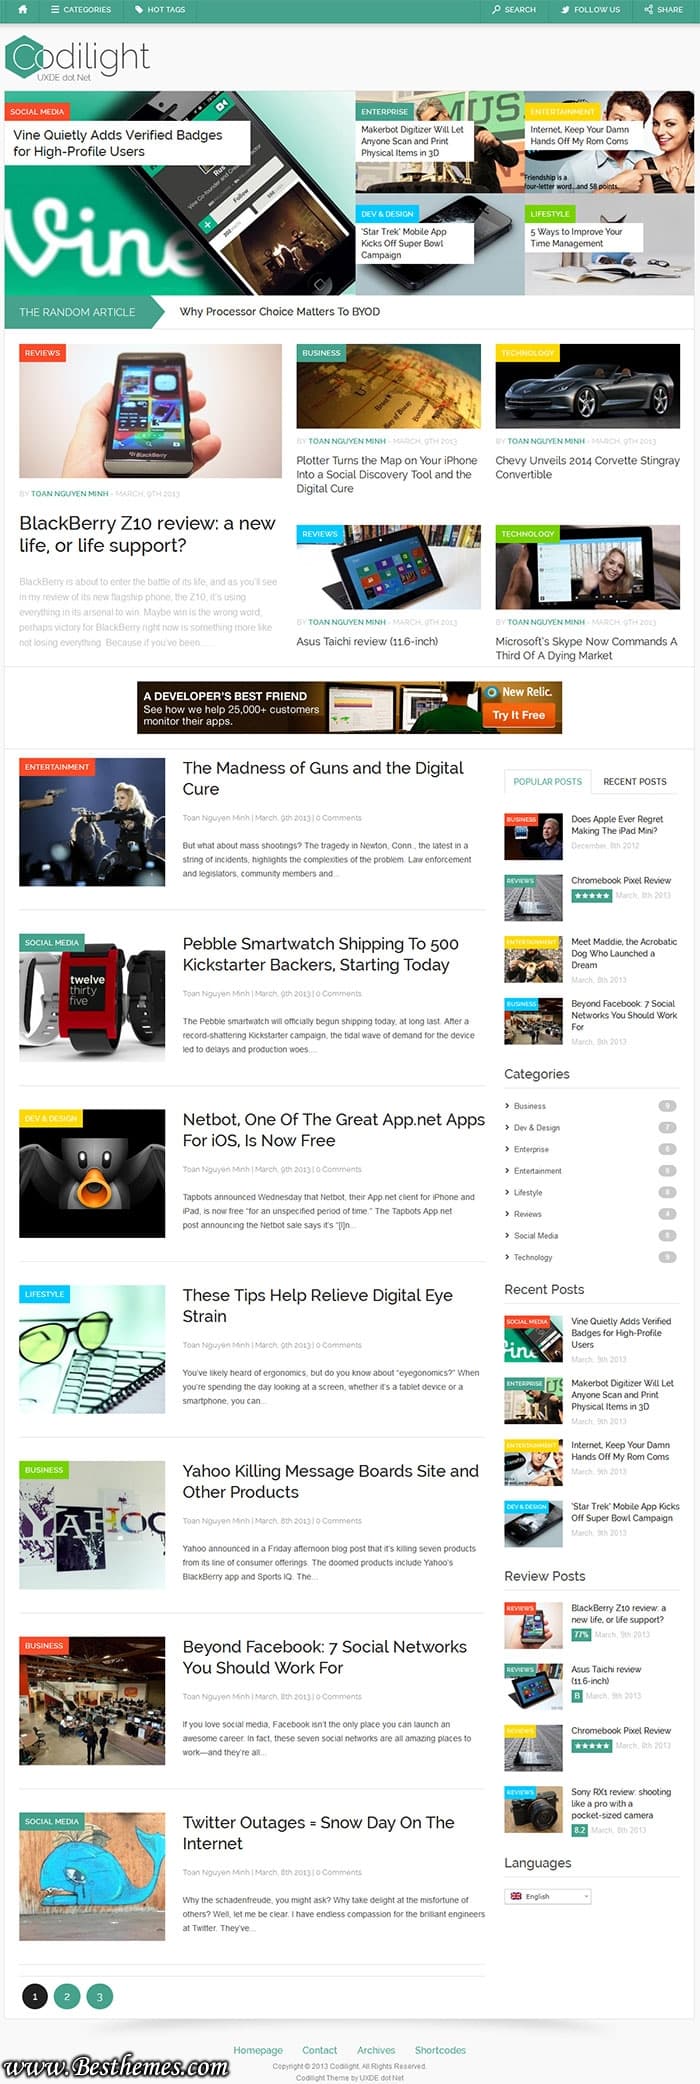 CodeLight WordPress Theme From UXDE, Download Codilight WordPress Theme, Powerful Blog and Magazine WordPress Themes, Best Magazine WP Themes, Best Blog WP Themes